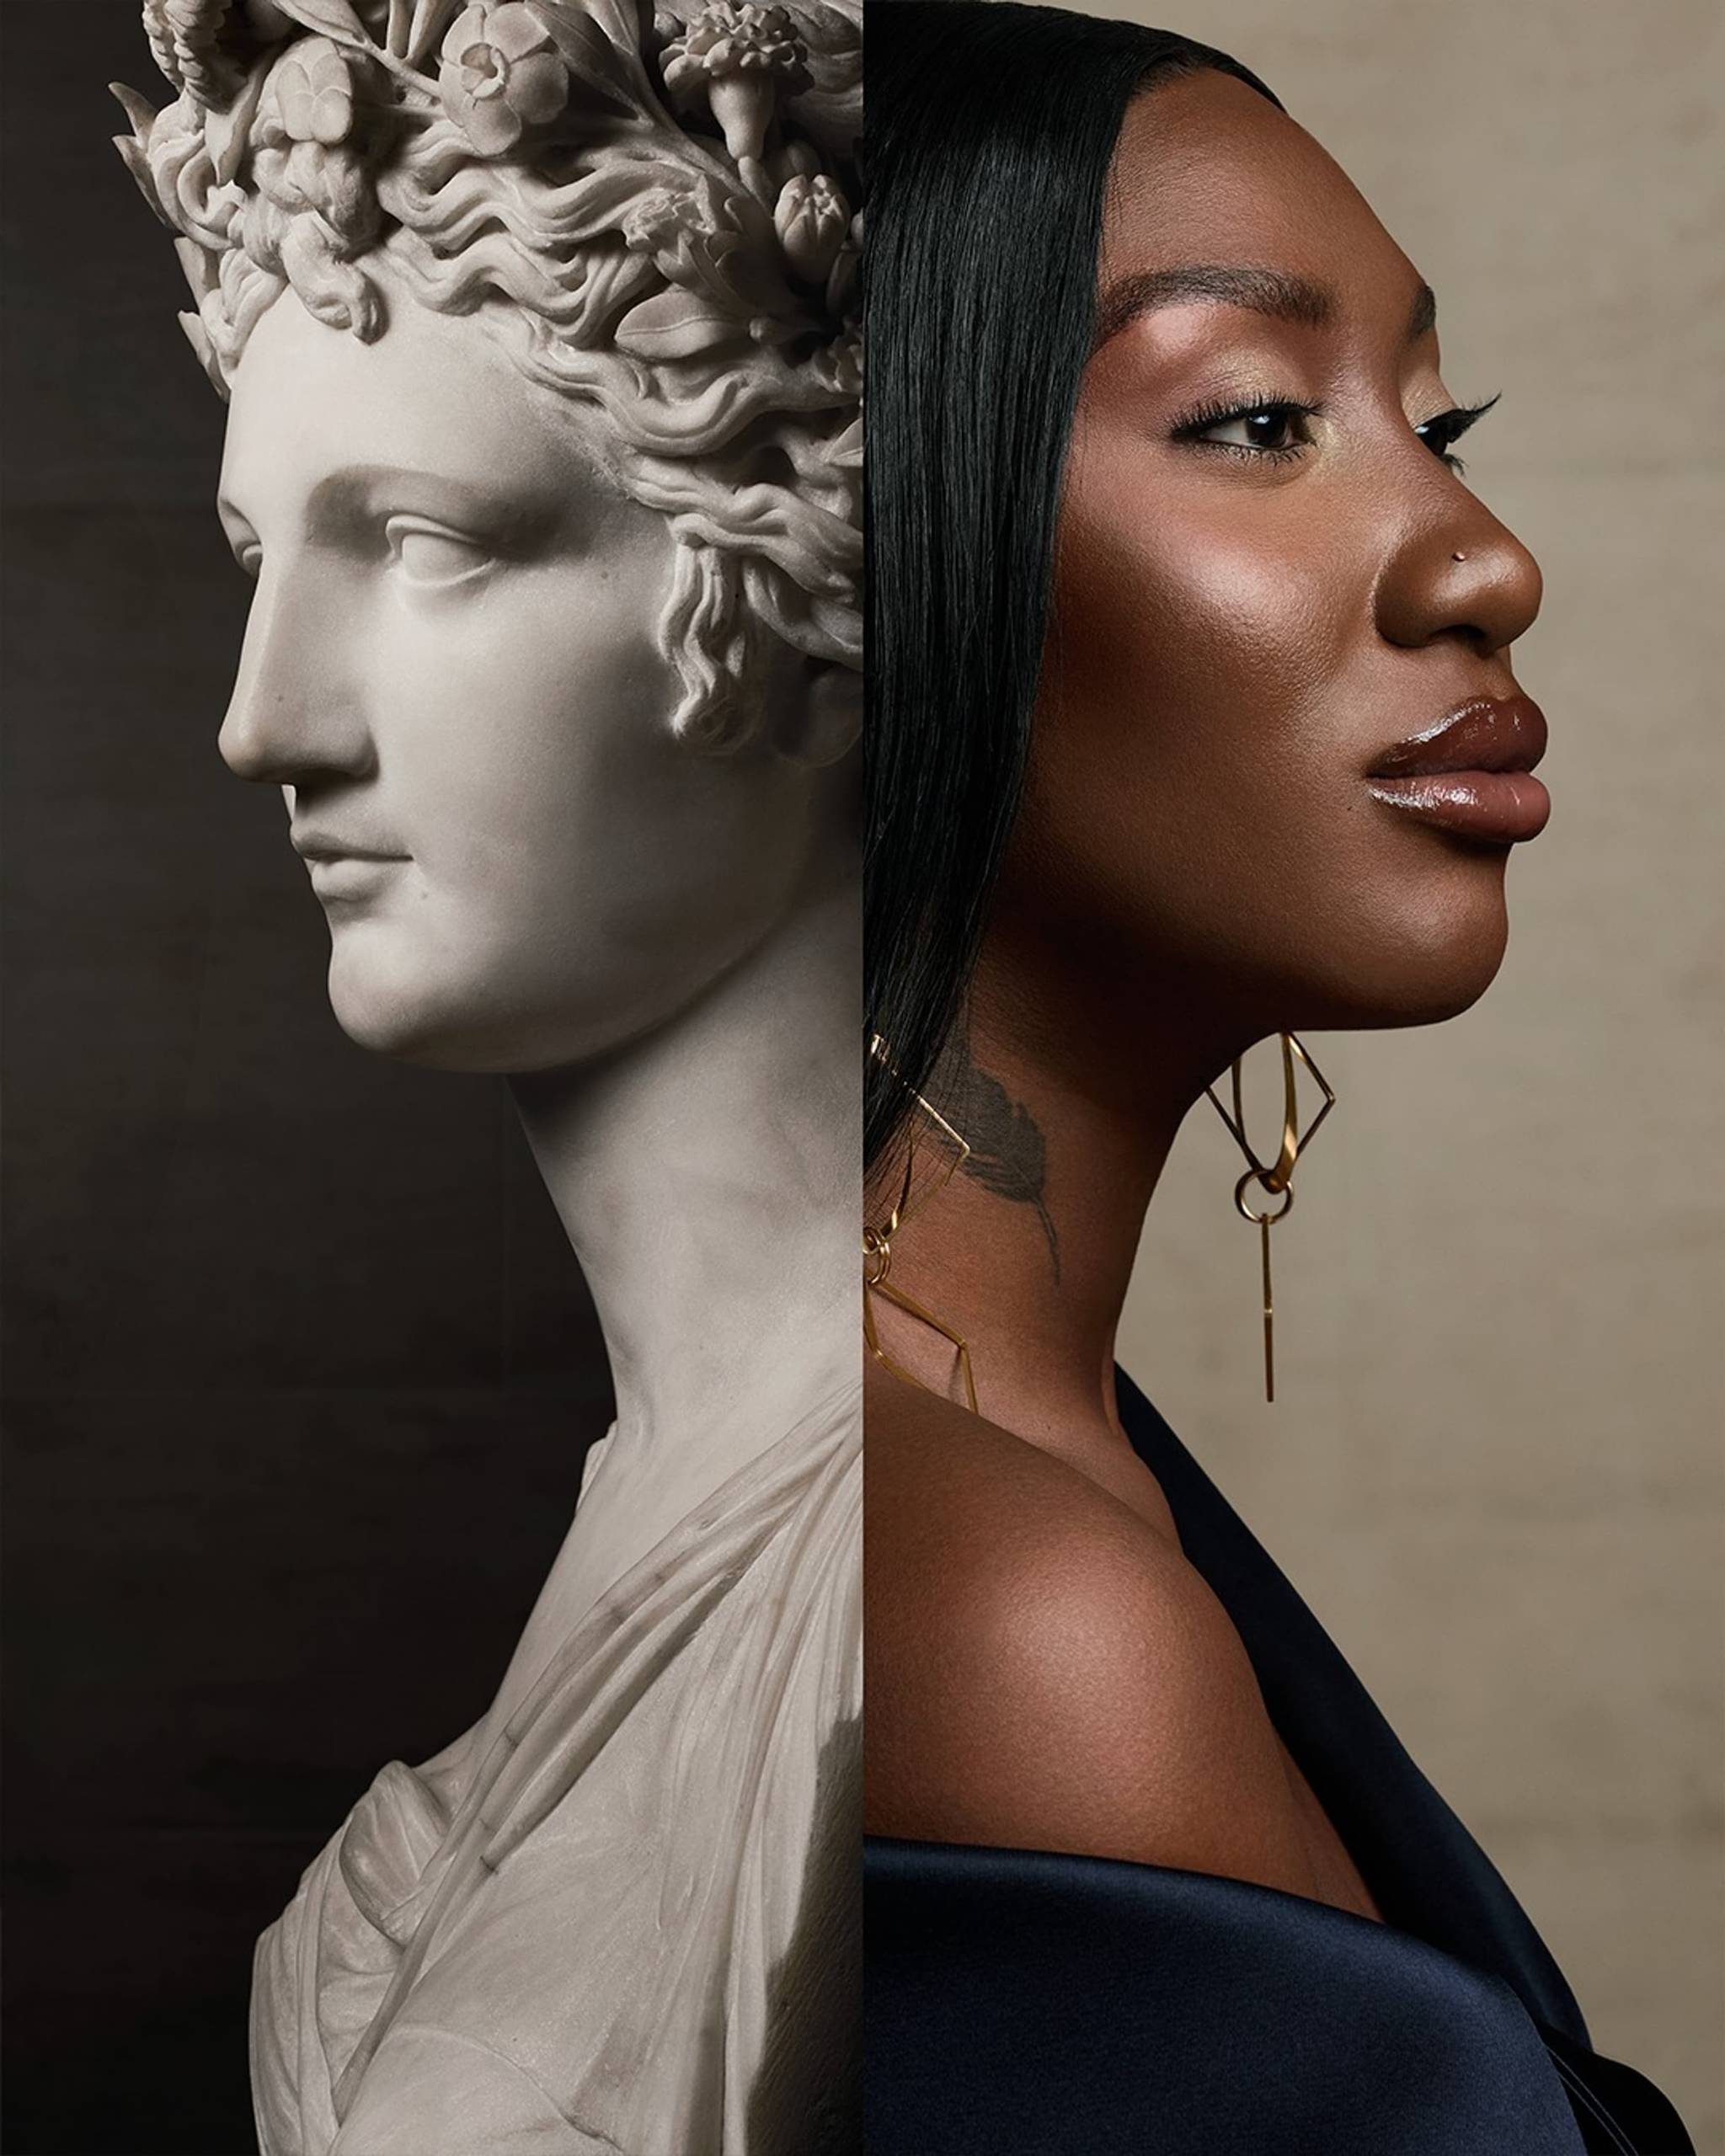 Lancôme x Louvre collection uses art to redefine beauty